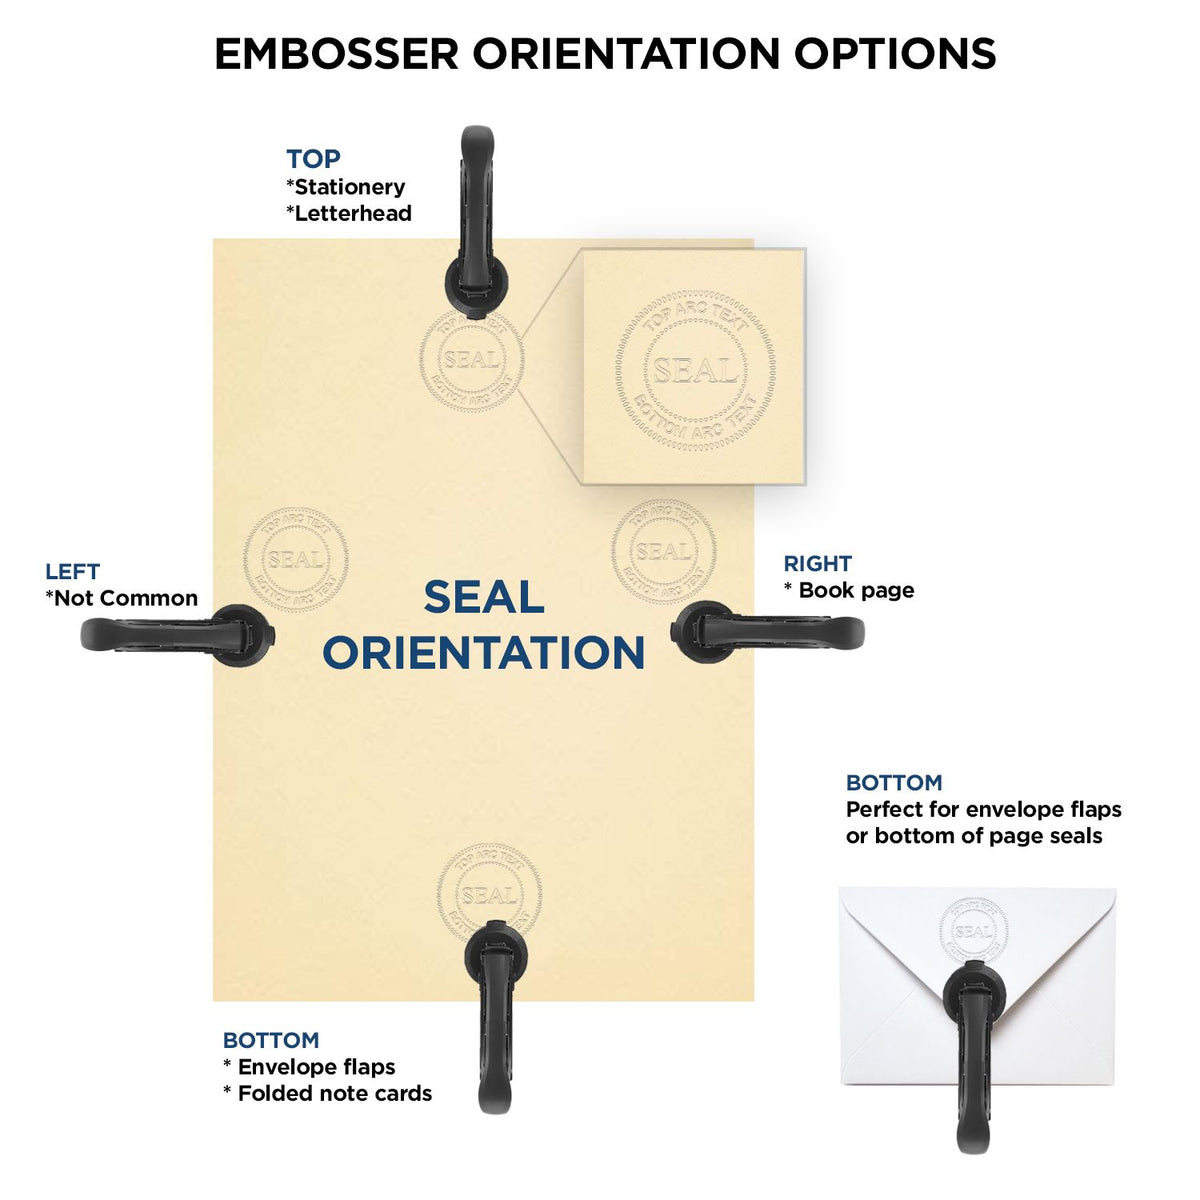 An infographic for the Heavy Duty Cast Iron Maryland Engineer Seal Embosser showing embosser orientation, this is showing examples of a top, bottom, right and left insert.